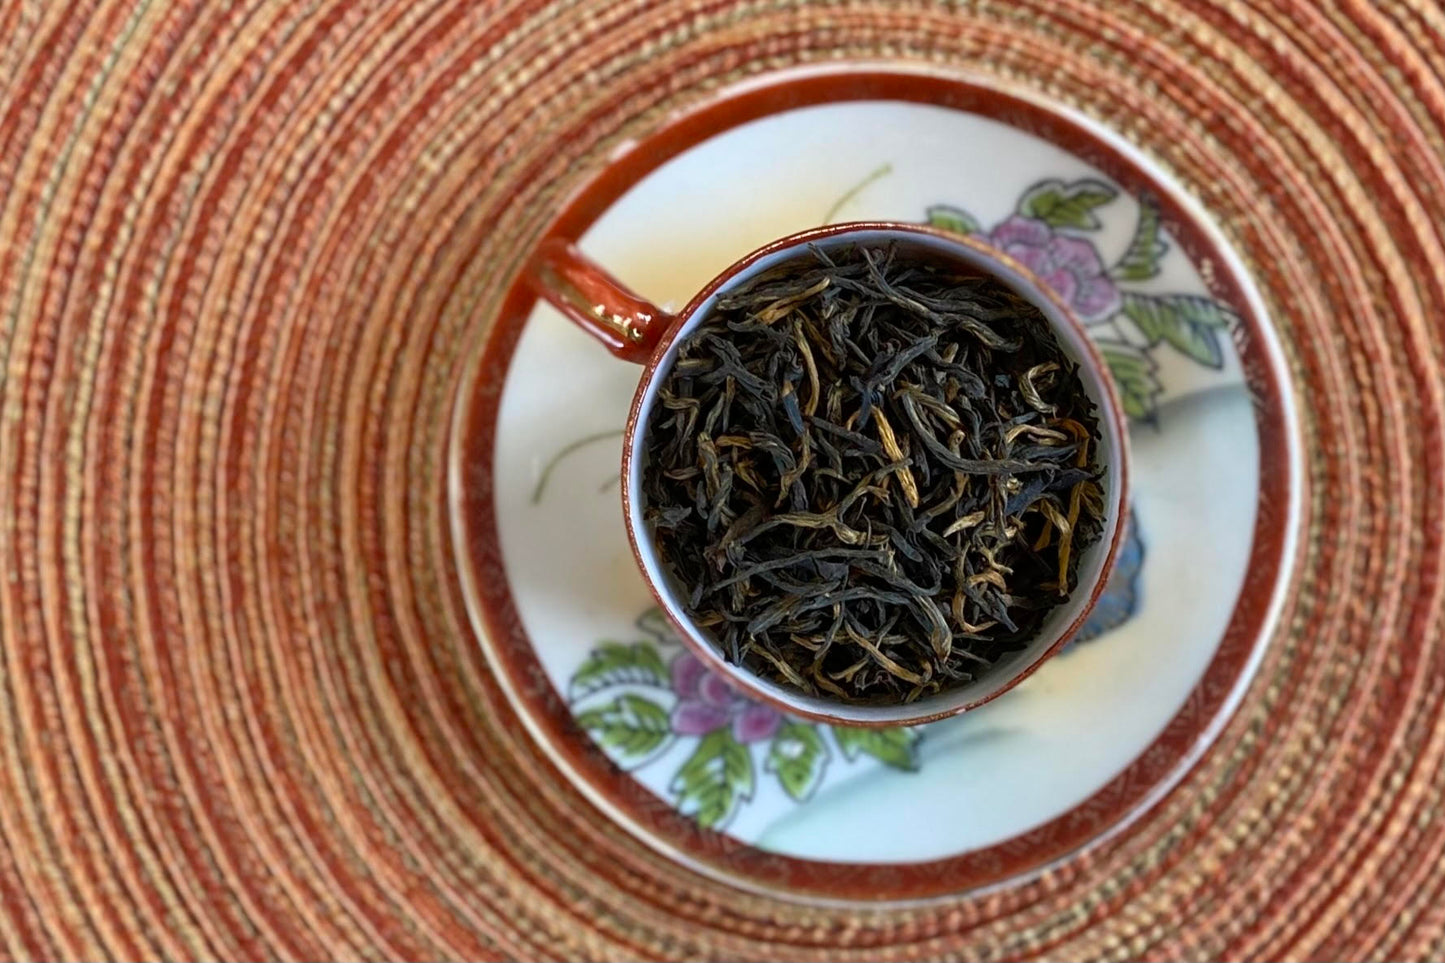 teacup full of black tea with gold tips